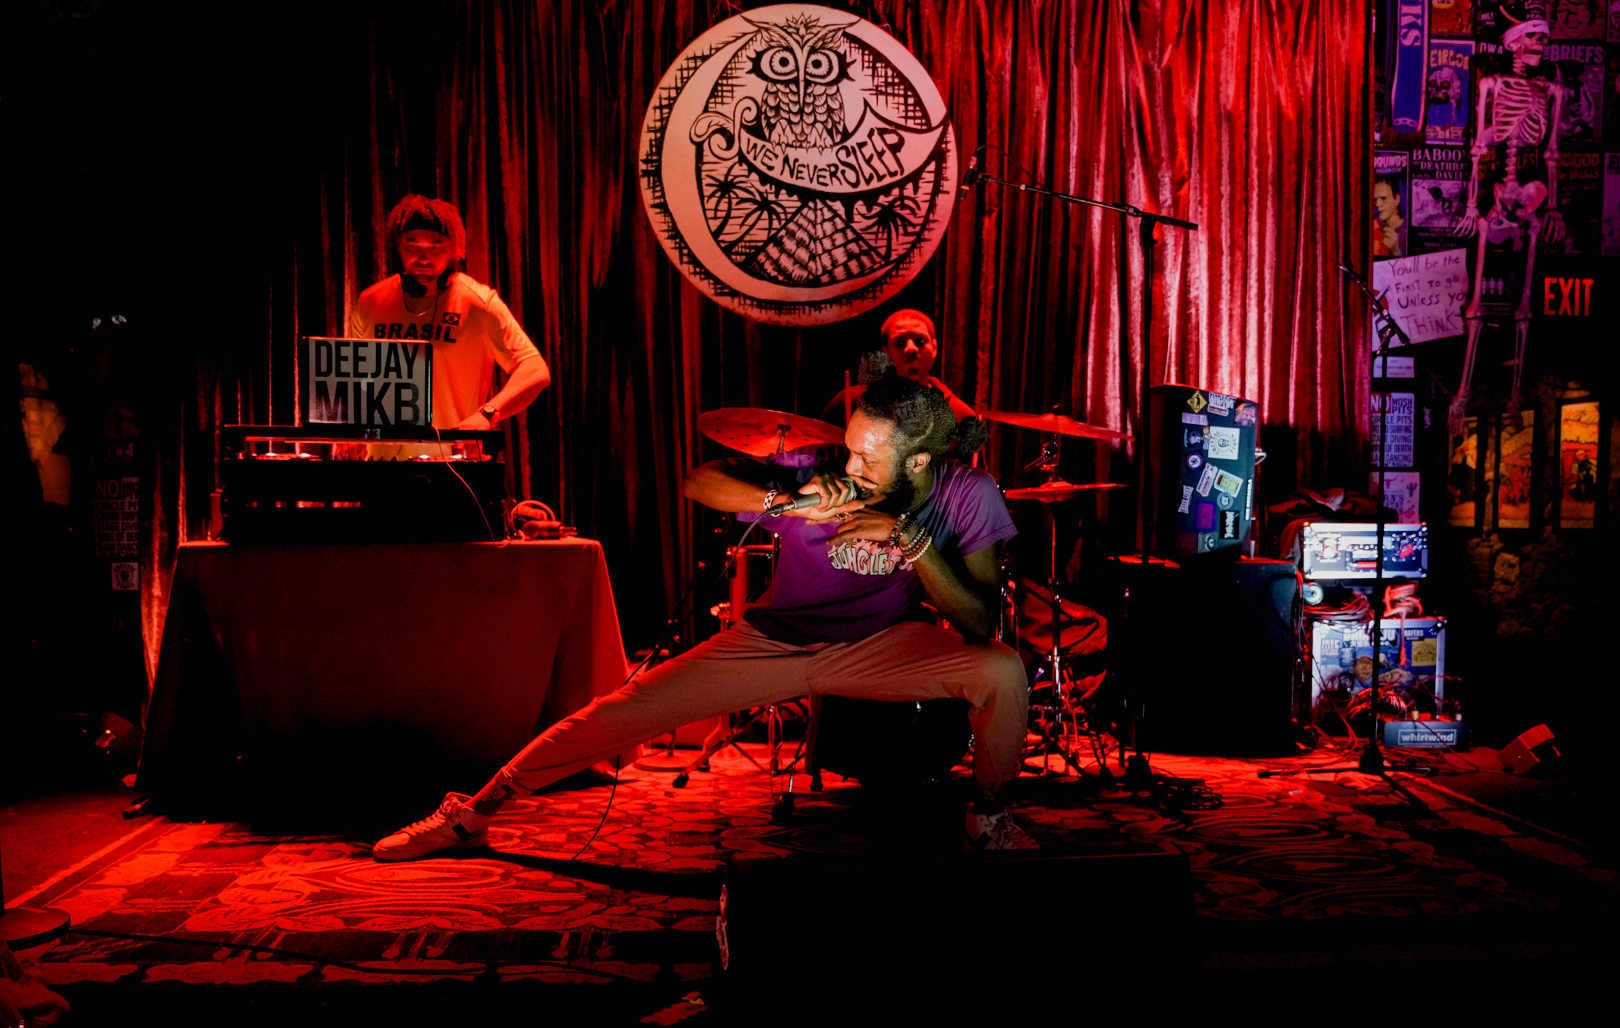 A full band on stage, singer low to ground in a wide-stanced crouch position